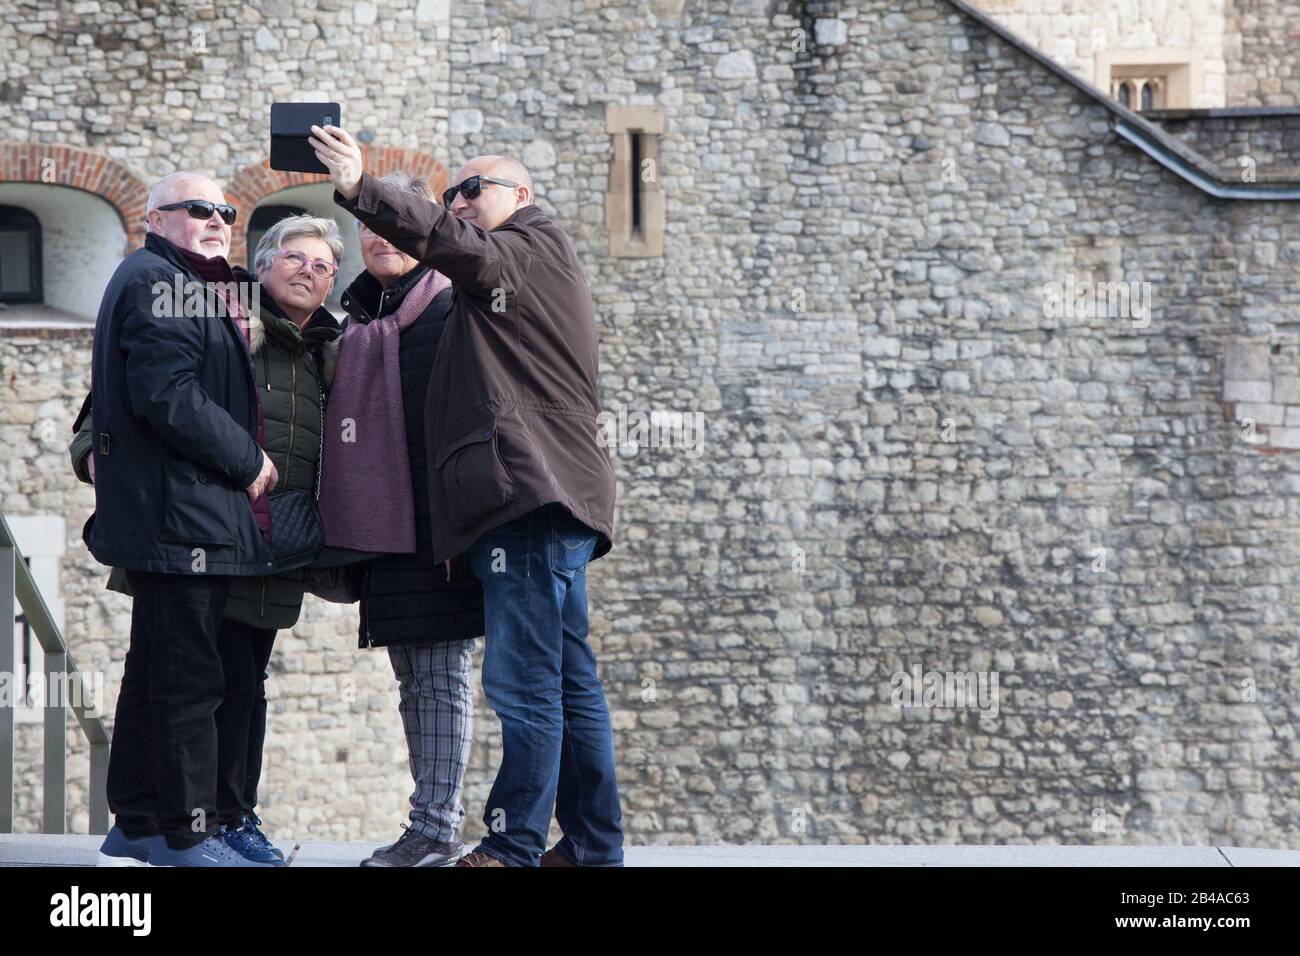 London, UK. 6th March, 2020. tourists took advantage of a sunny day to visit the Tower of London without wearing facemasks, showing a 'business as usual' attitude to the Corvid-19 coronavirus. Anna Watson/Alamy Live News Stock Photo